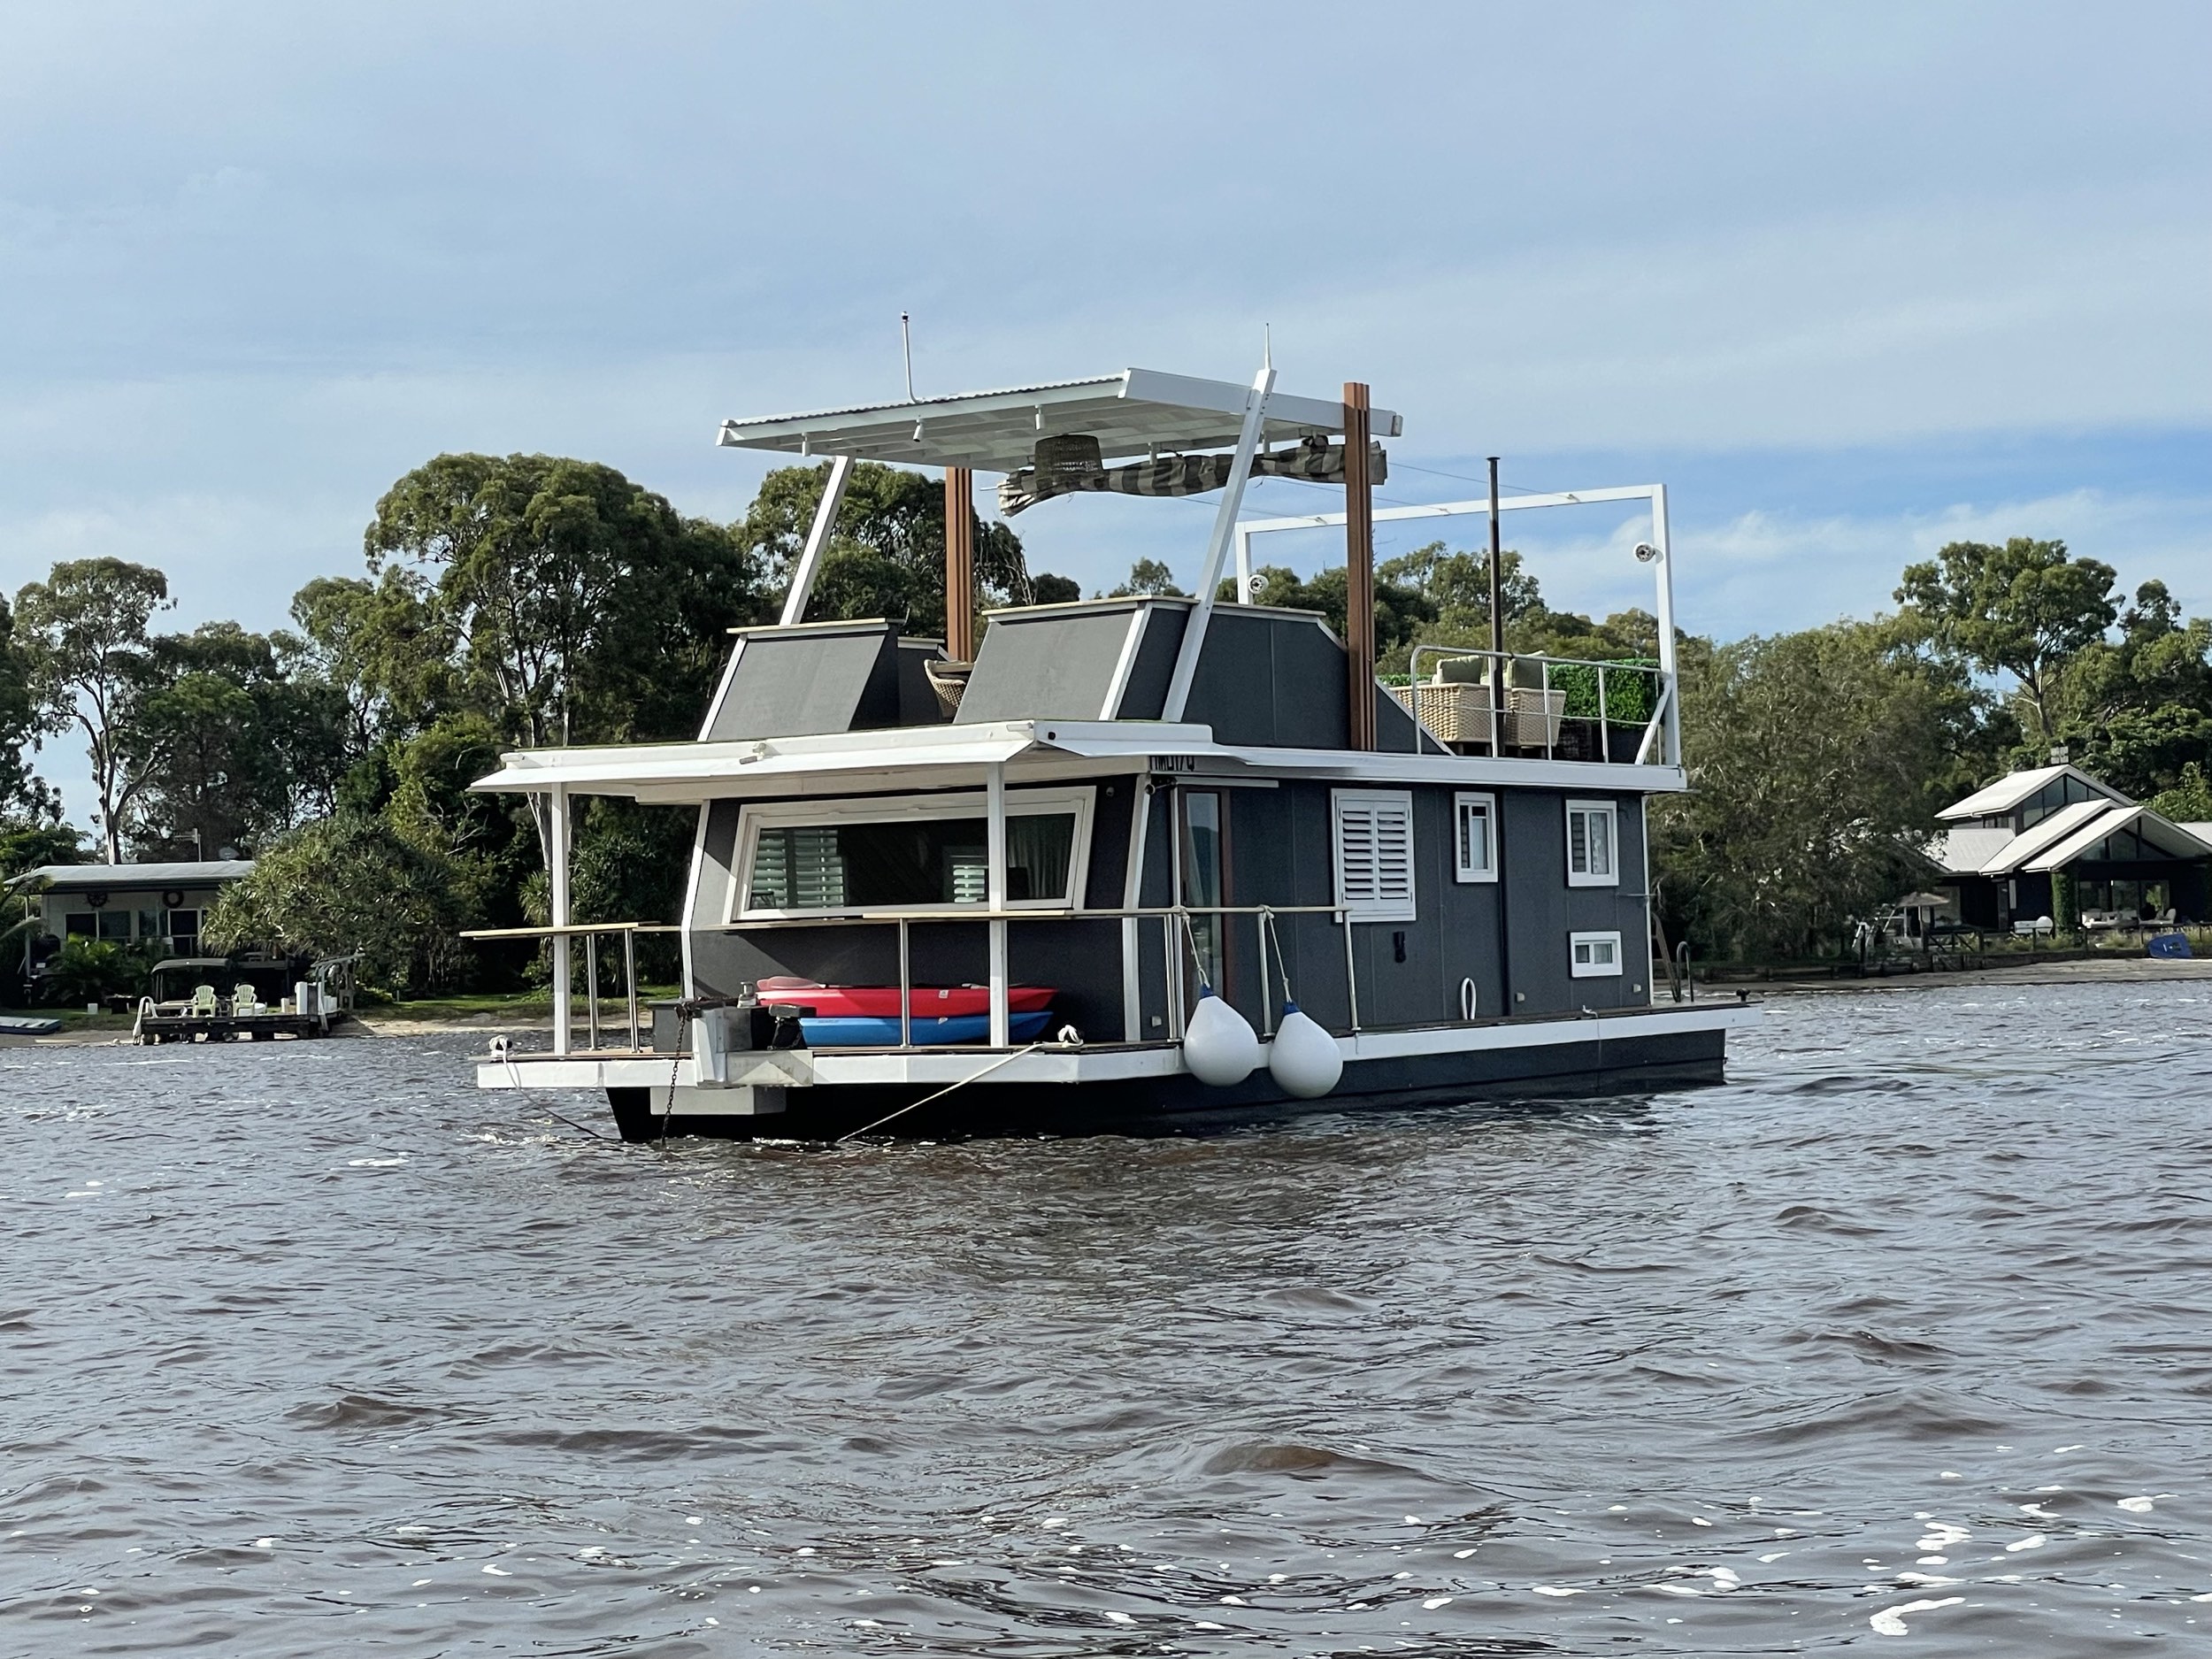 A Boathouse on Noosa River 